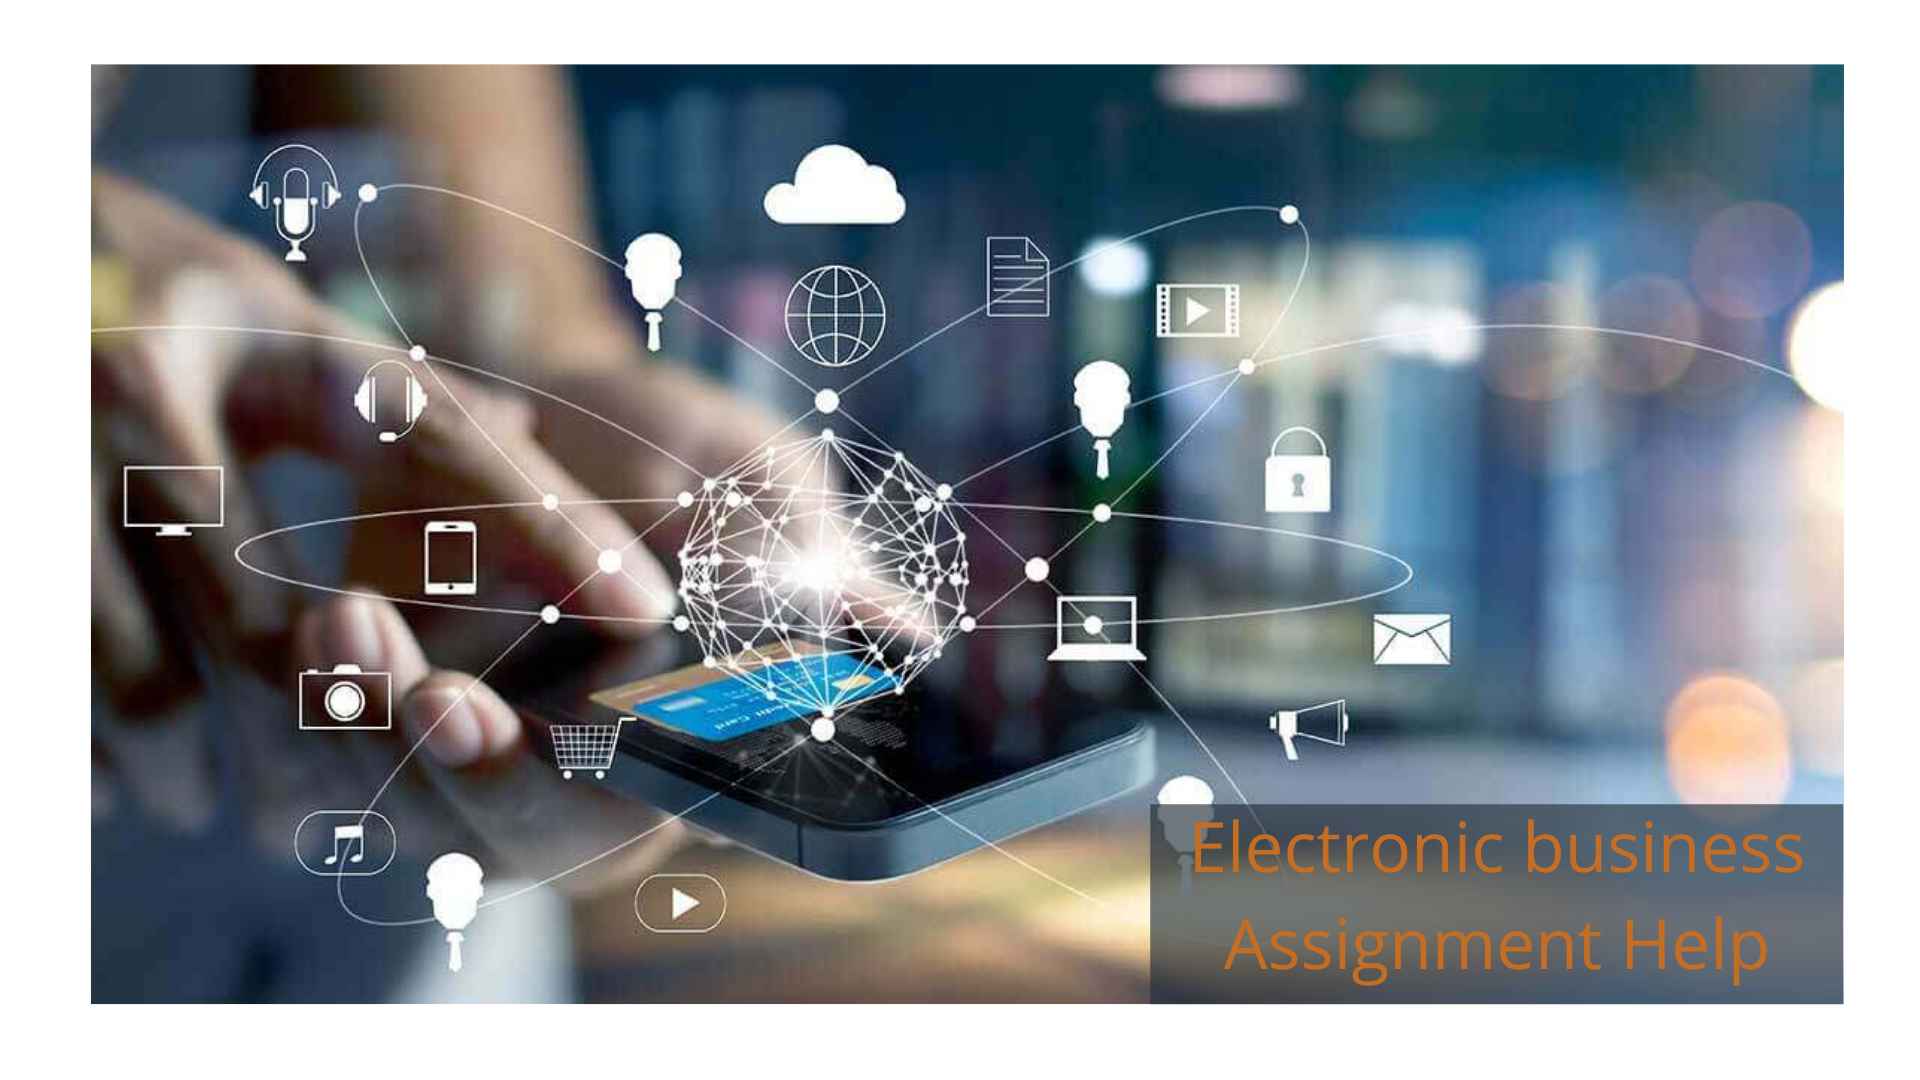 Electronic business assignment help